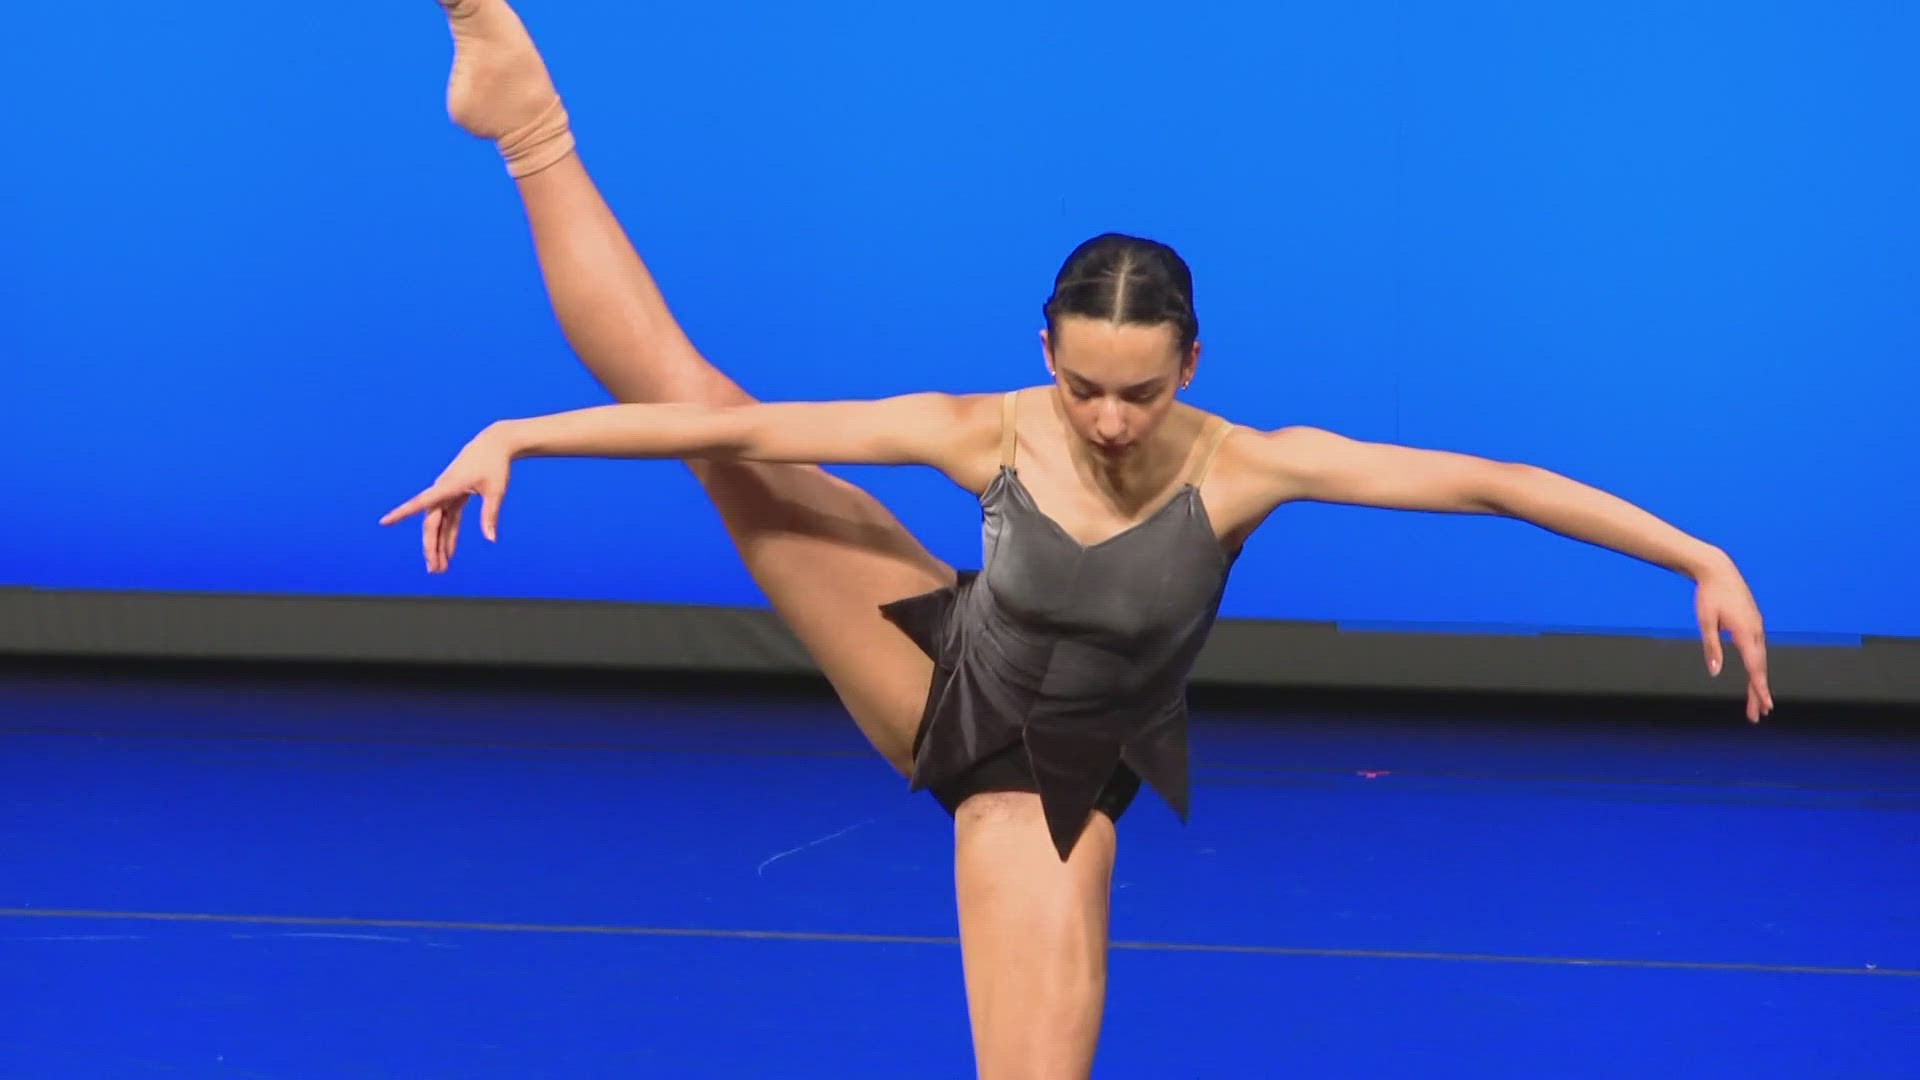 Hundreds of talented dancers aged 9 to 19 are in Carmel putting their best foot forward at the Youth America Grand Prix. The largest student ballet competition.